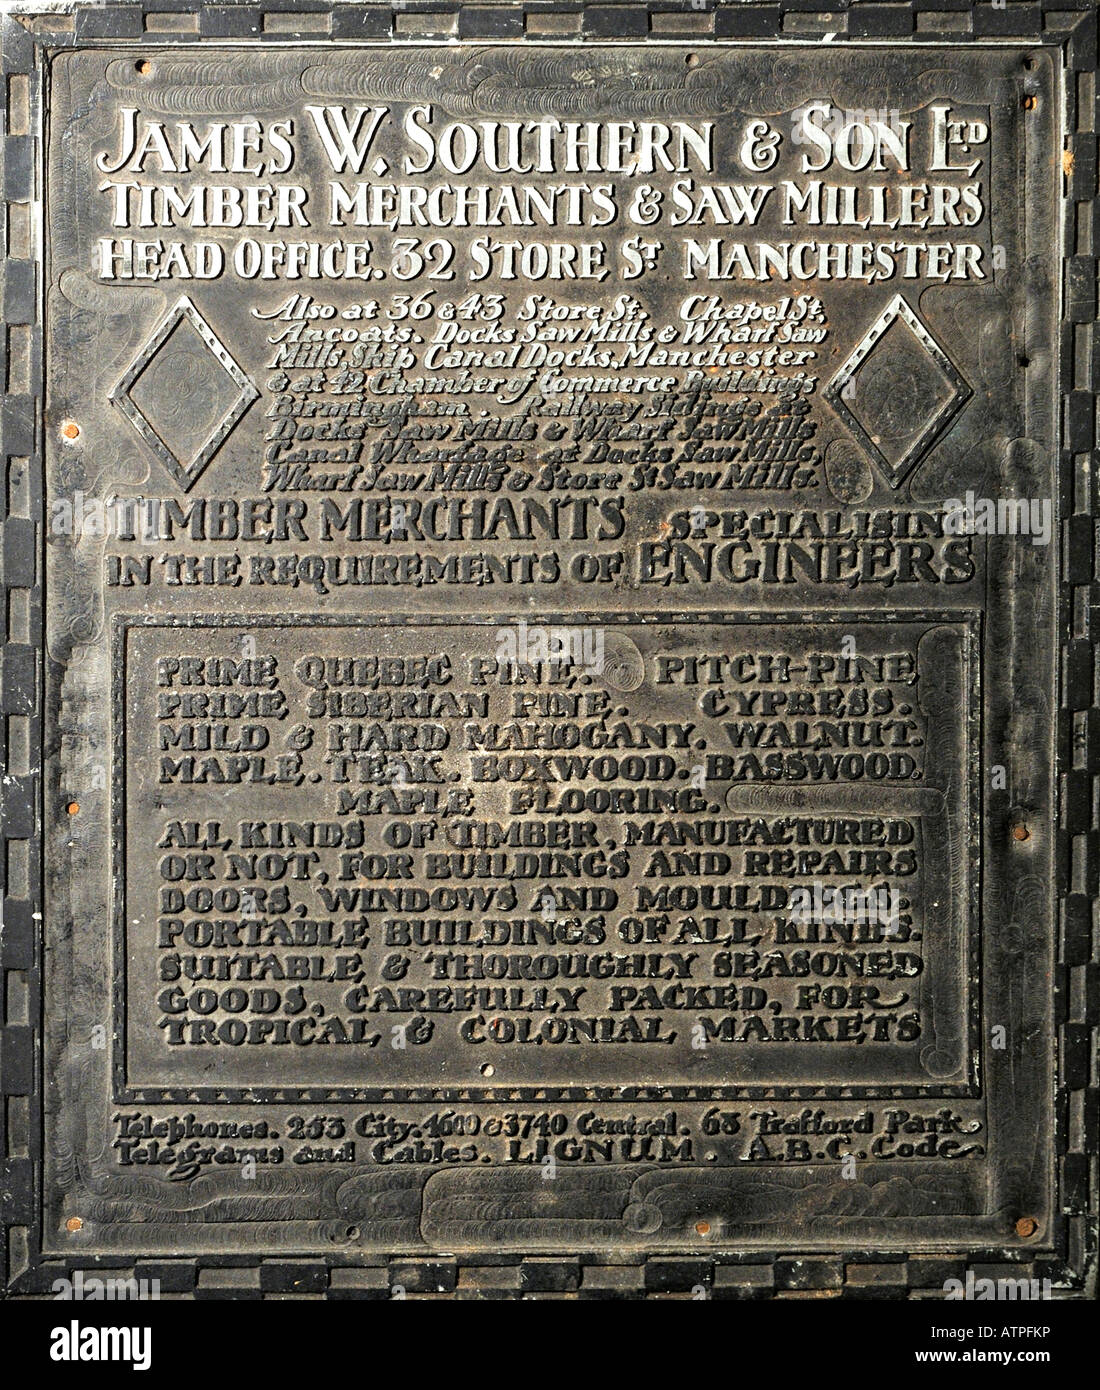 Zinc and Wood Printing Block Plate digitally laterally rotated to show advertisement for James W Southern & Sons Ltd Timber Stock Photo